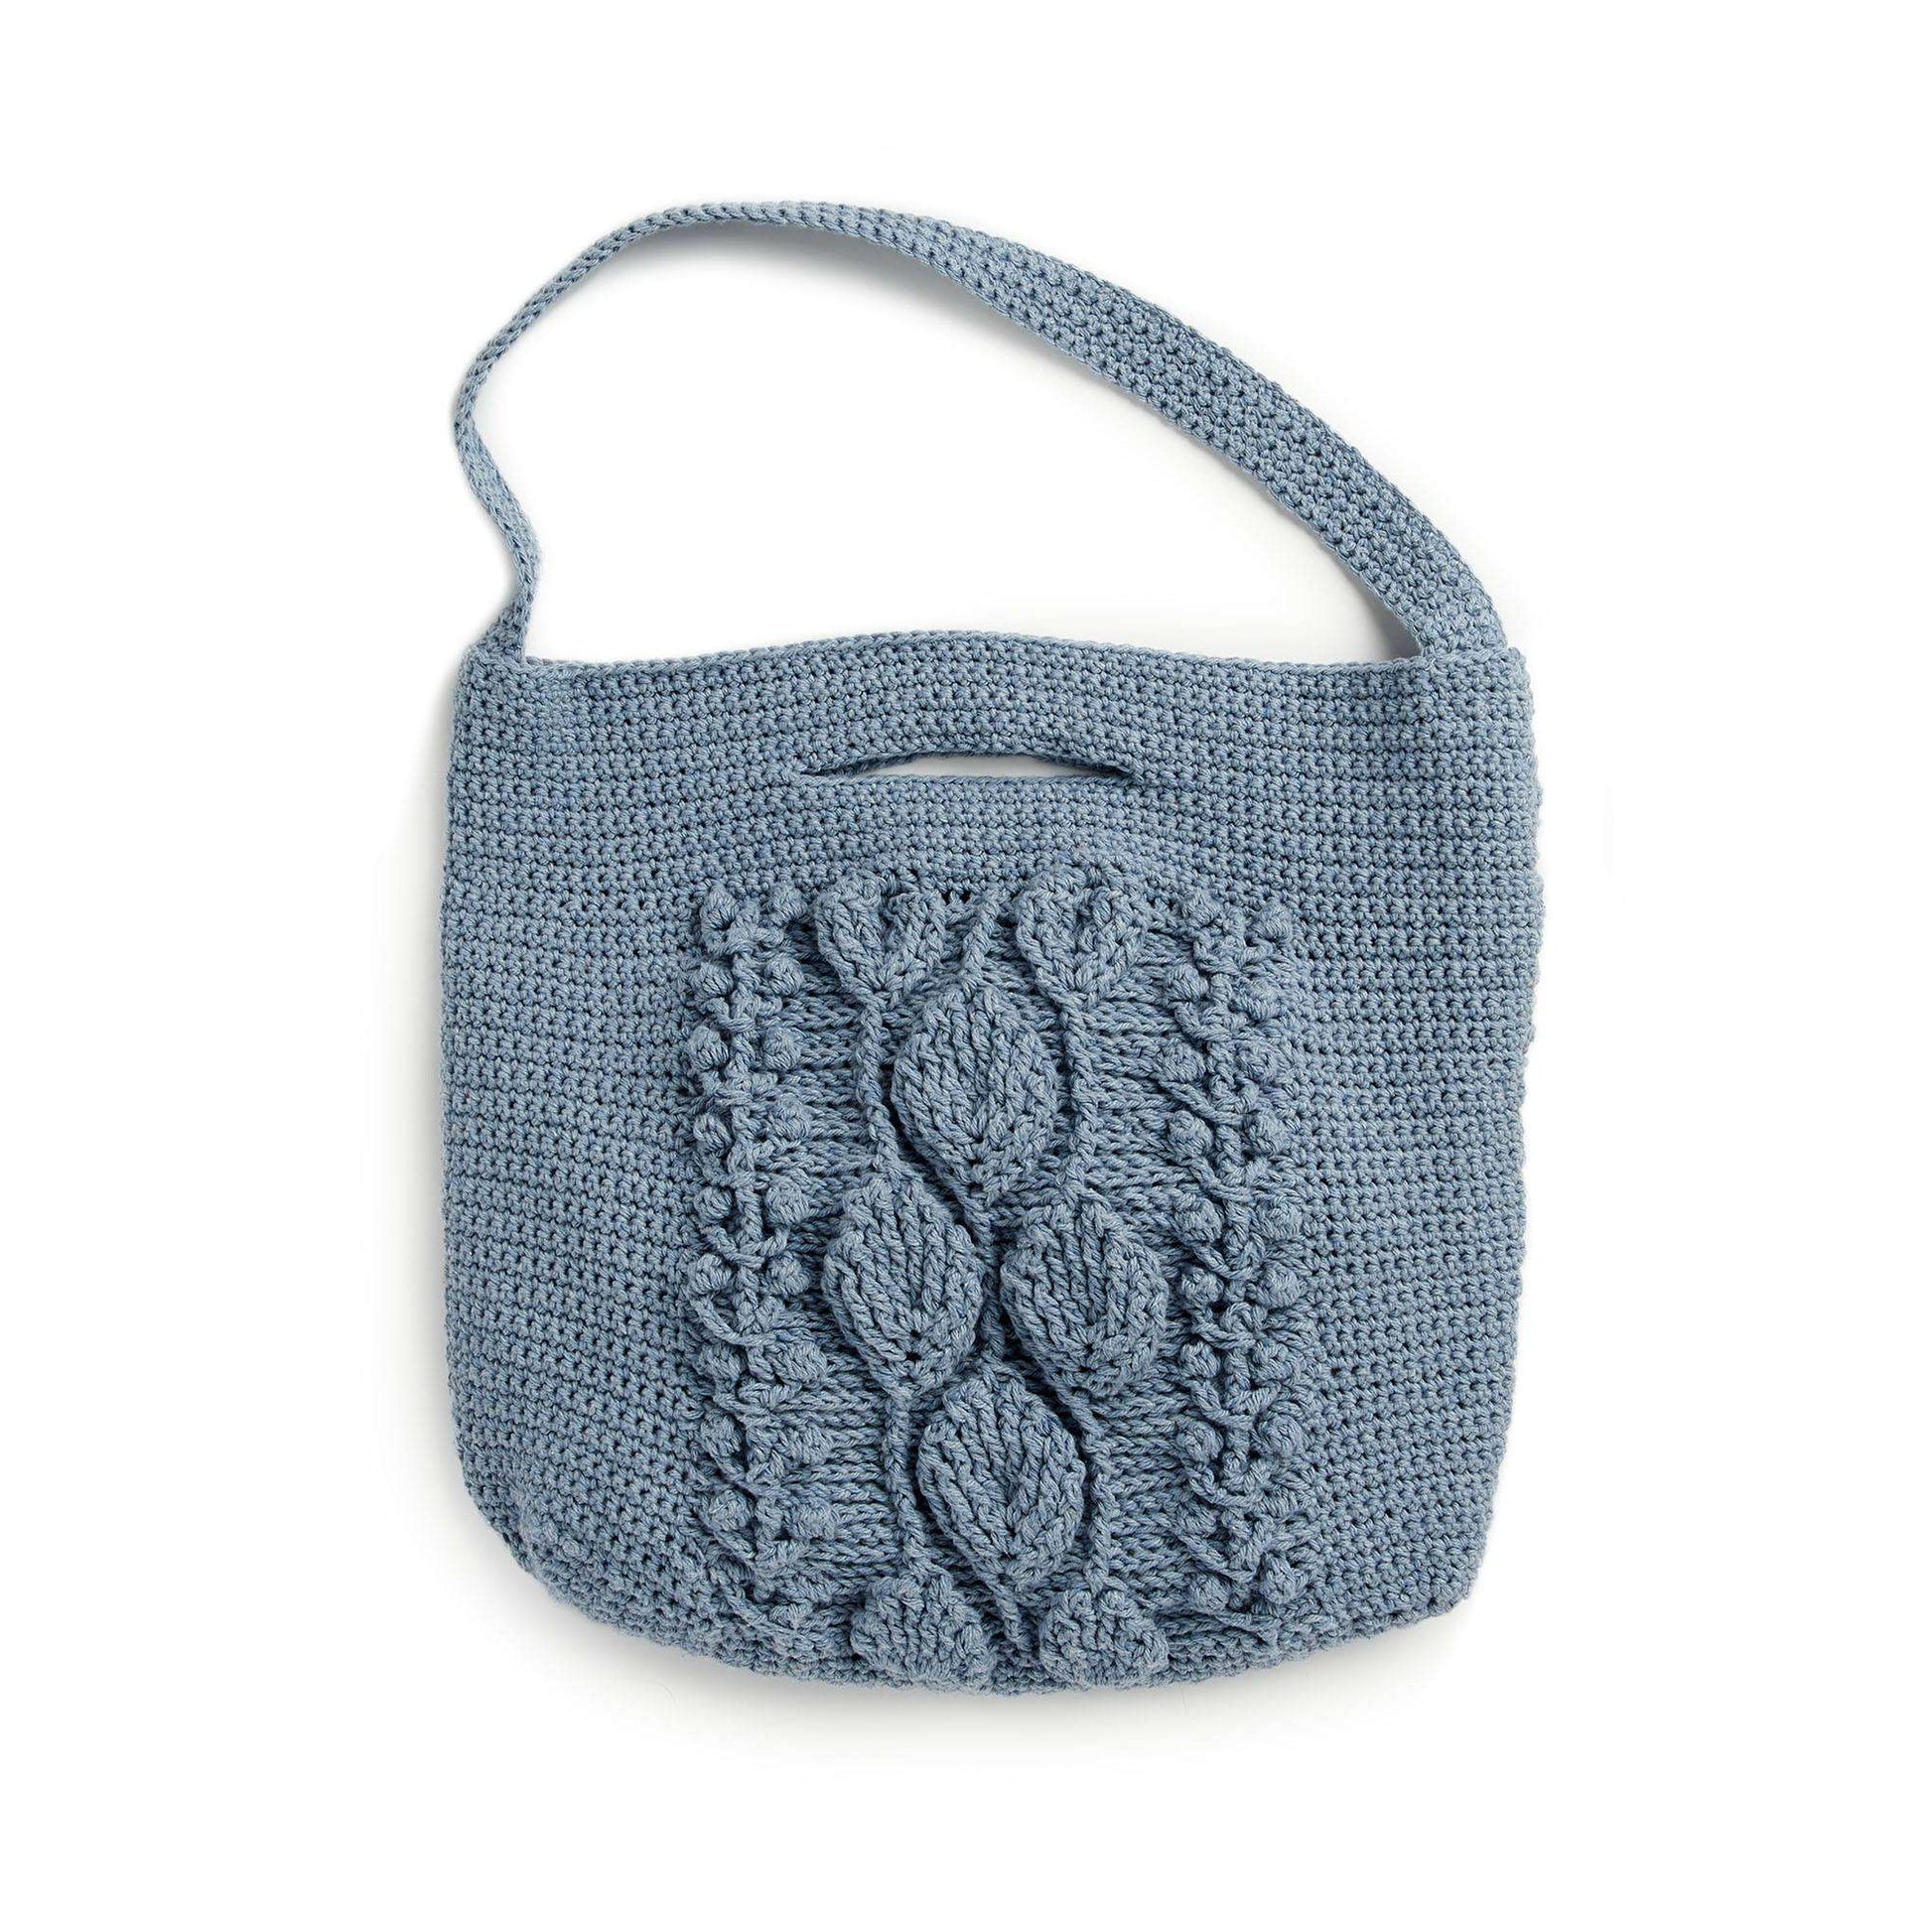 Lily Climbing Leaves Crochet Tote Bag Pattern